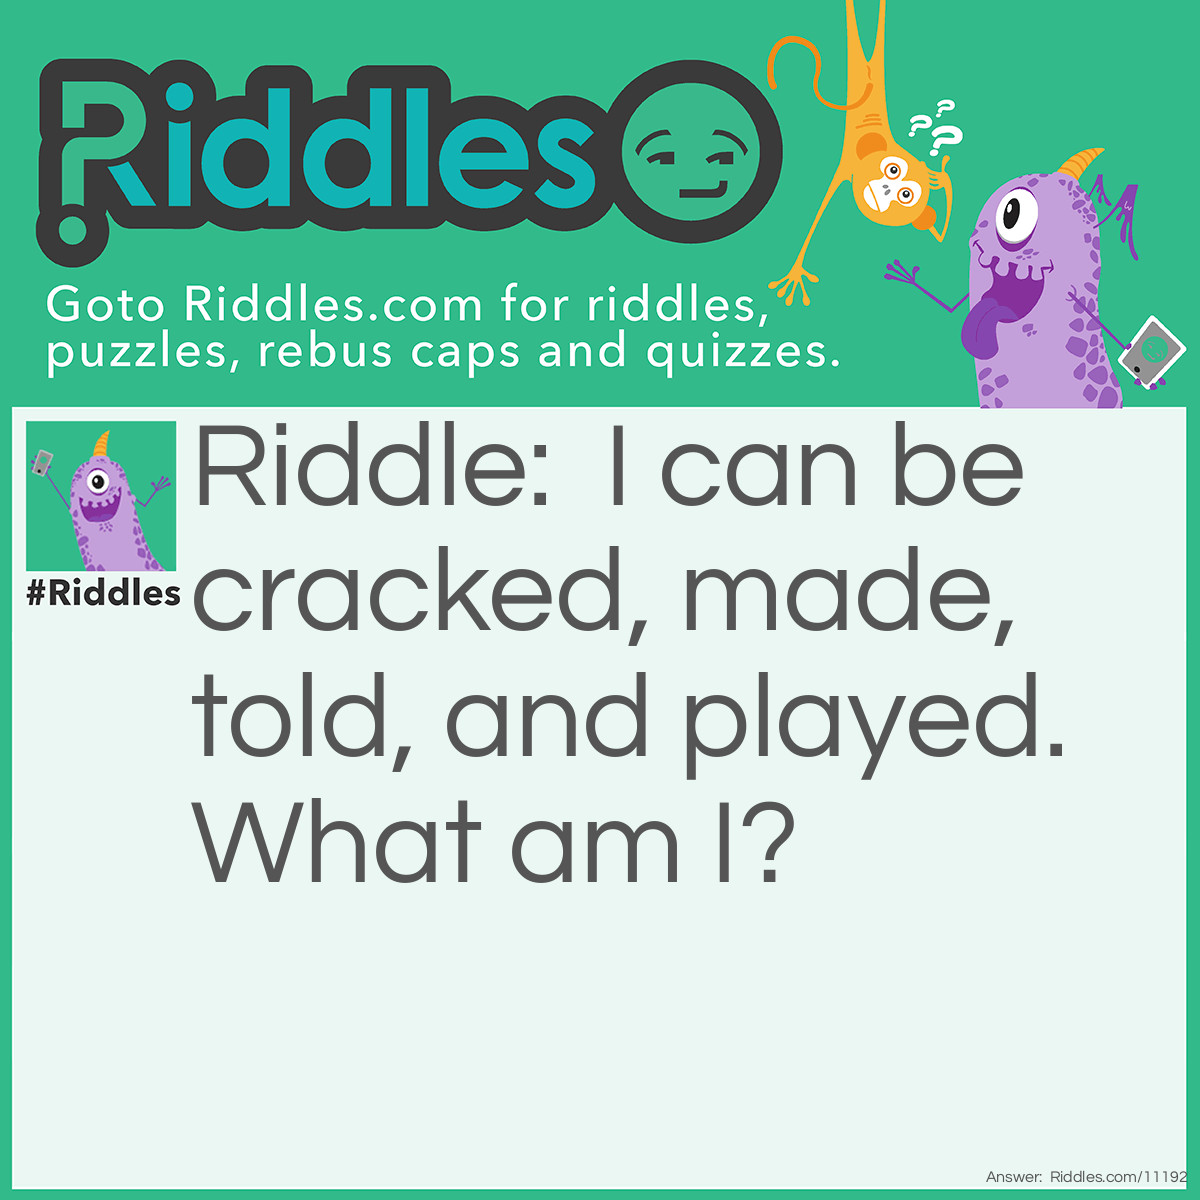 Riddle: I can be cracked, made, told, and played. What am I? Answer: A joke